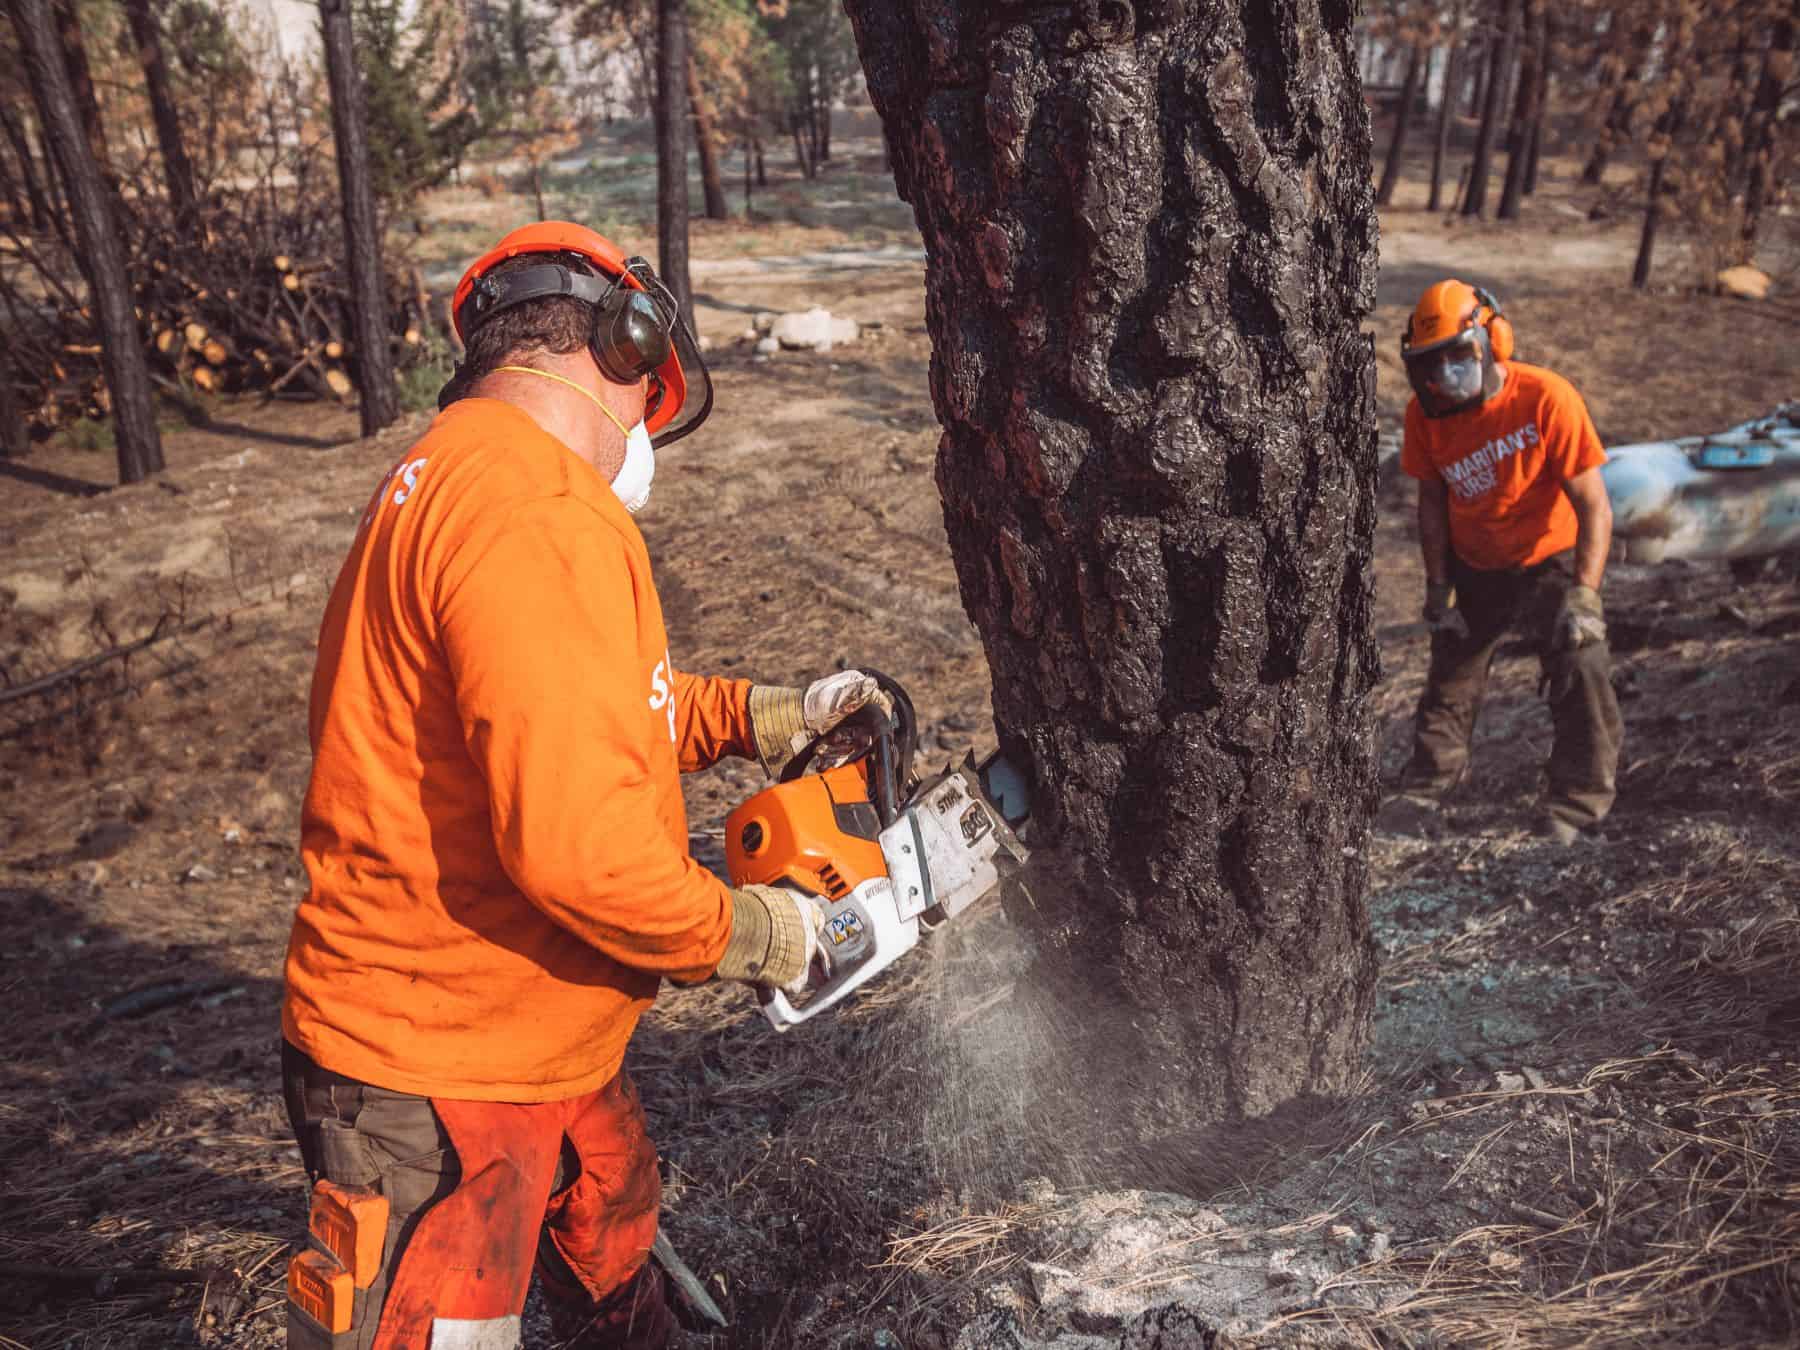 Armed with chainsaws and a skid steer, teams of volunteers helped clear properties of damaged trees that were at risk of falling.